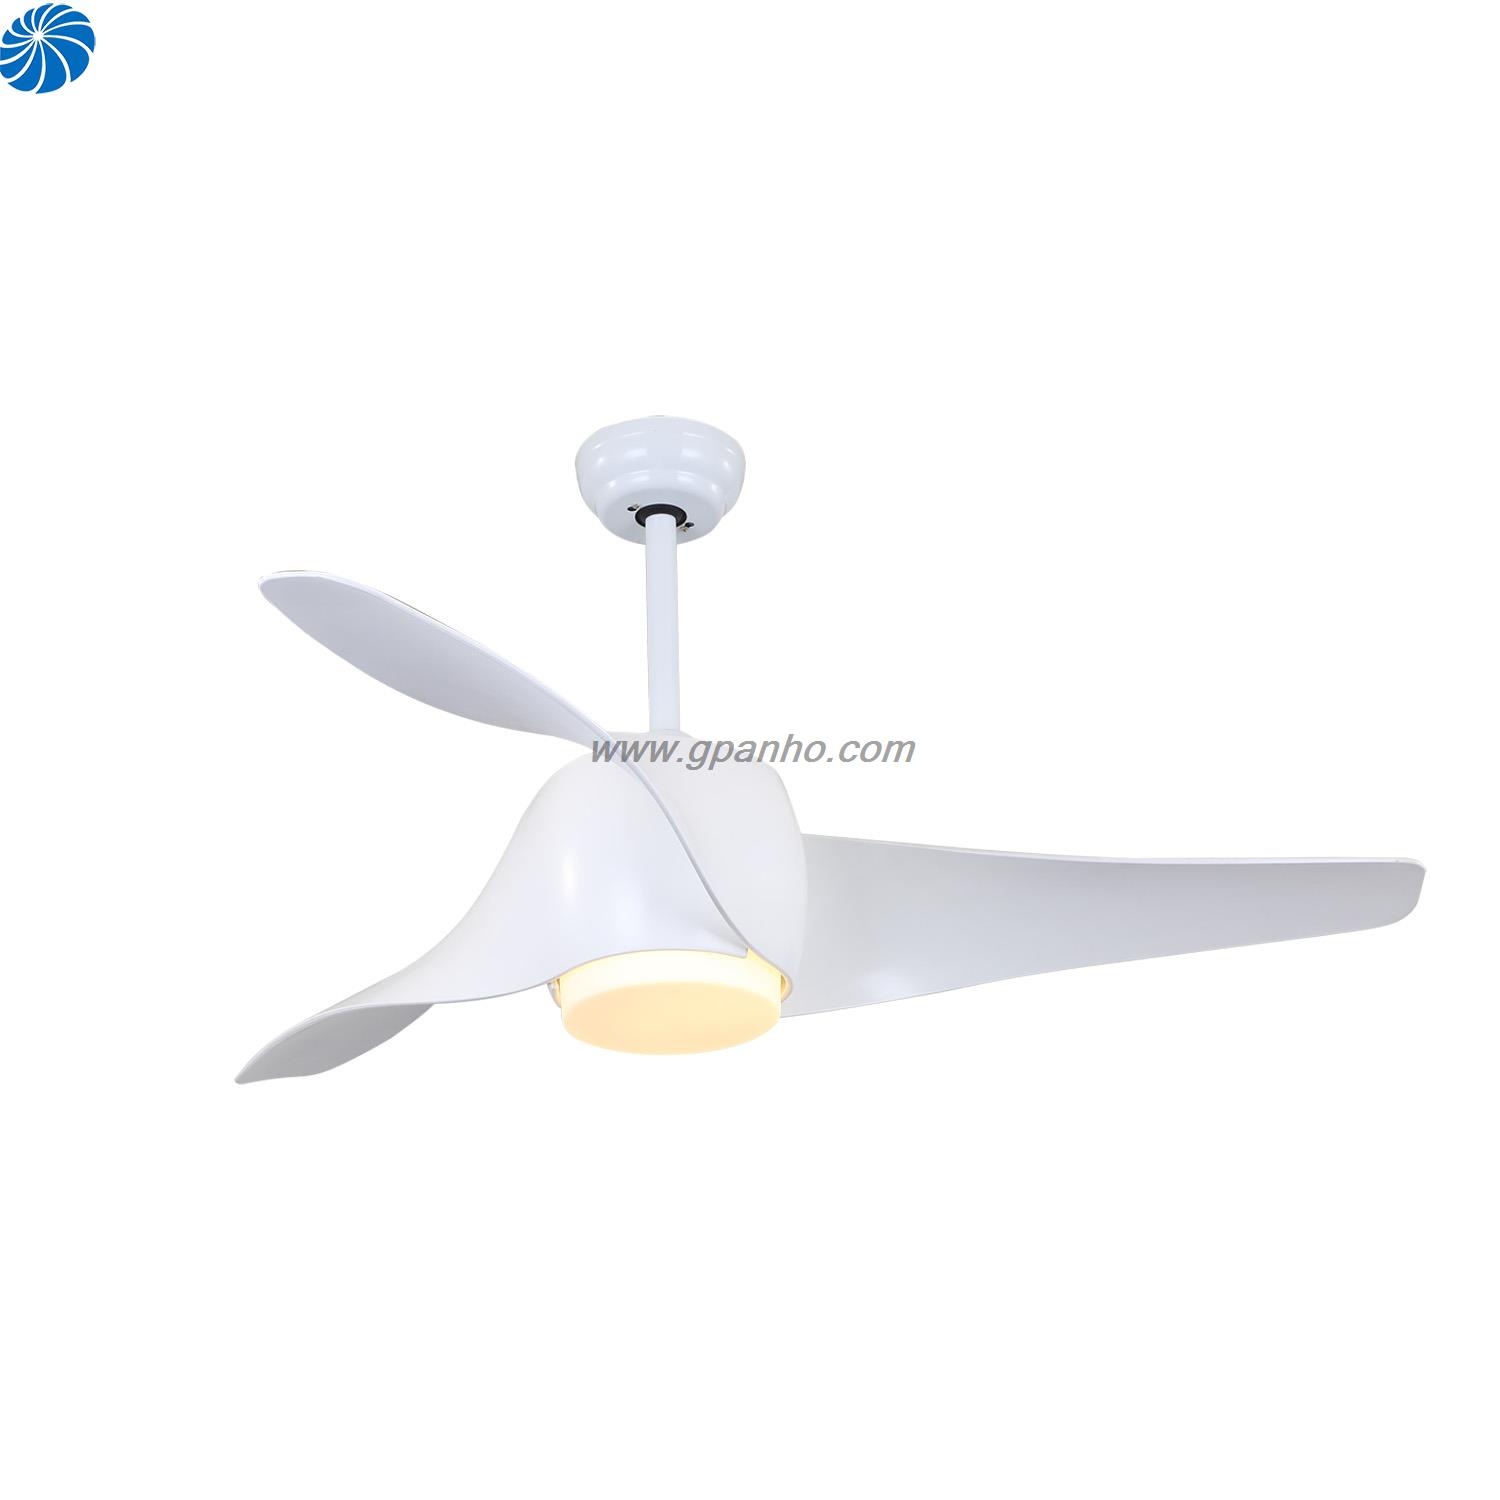 HOT 52 inch ABS 3 blades ceiling fan for USA Mexico